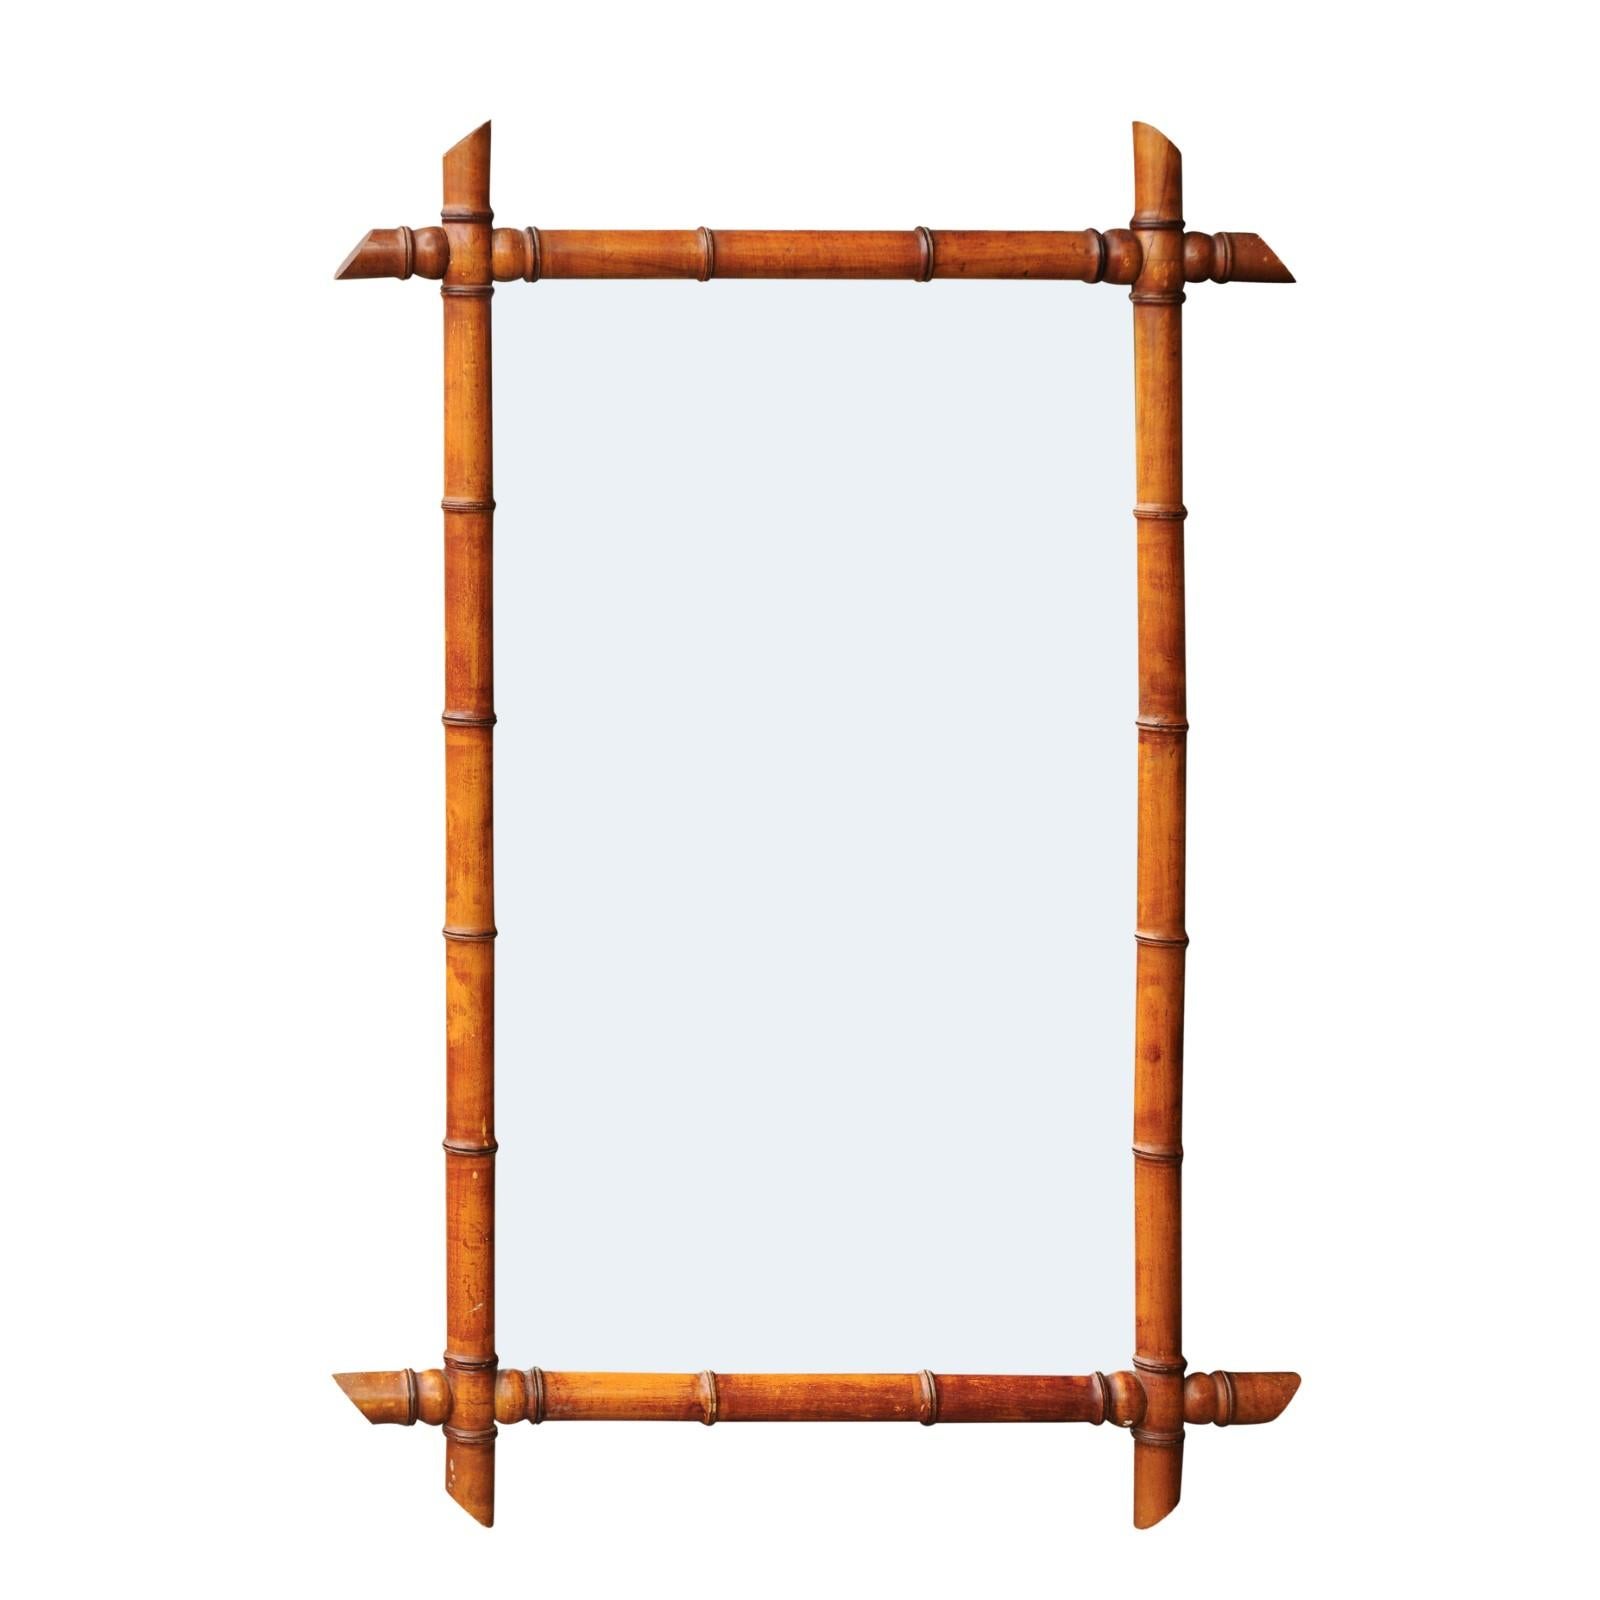 English Faux-Bamboo Wall Mirror from the Early 20th Century with Clear Mirror